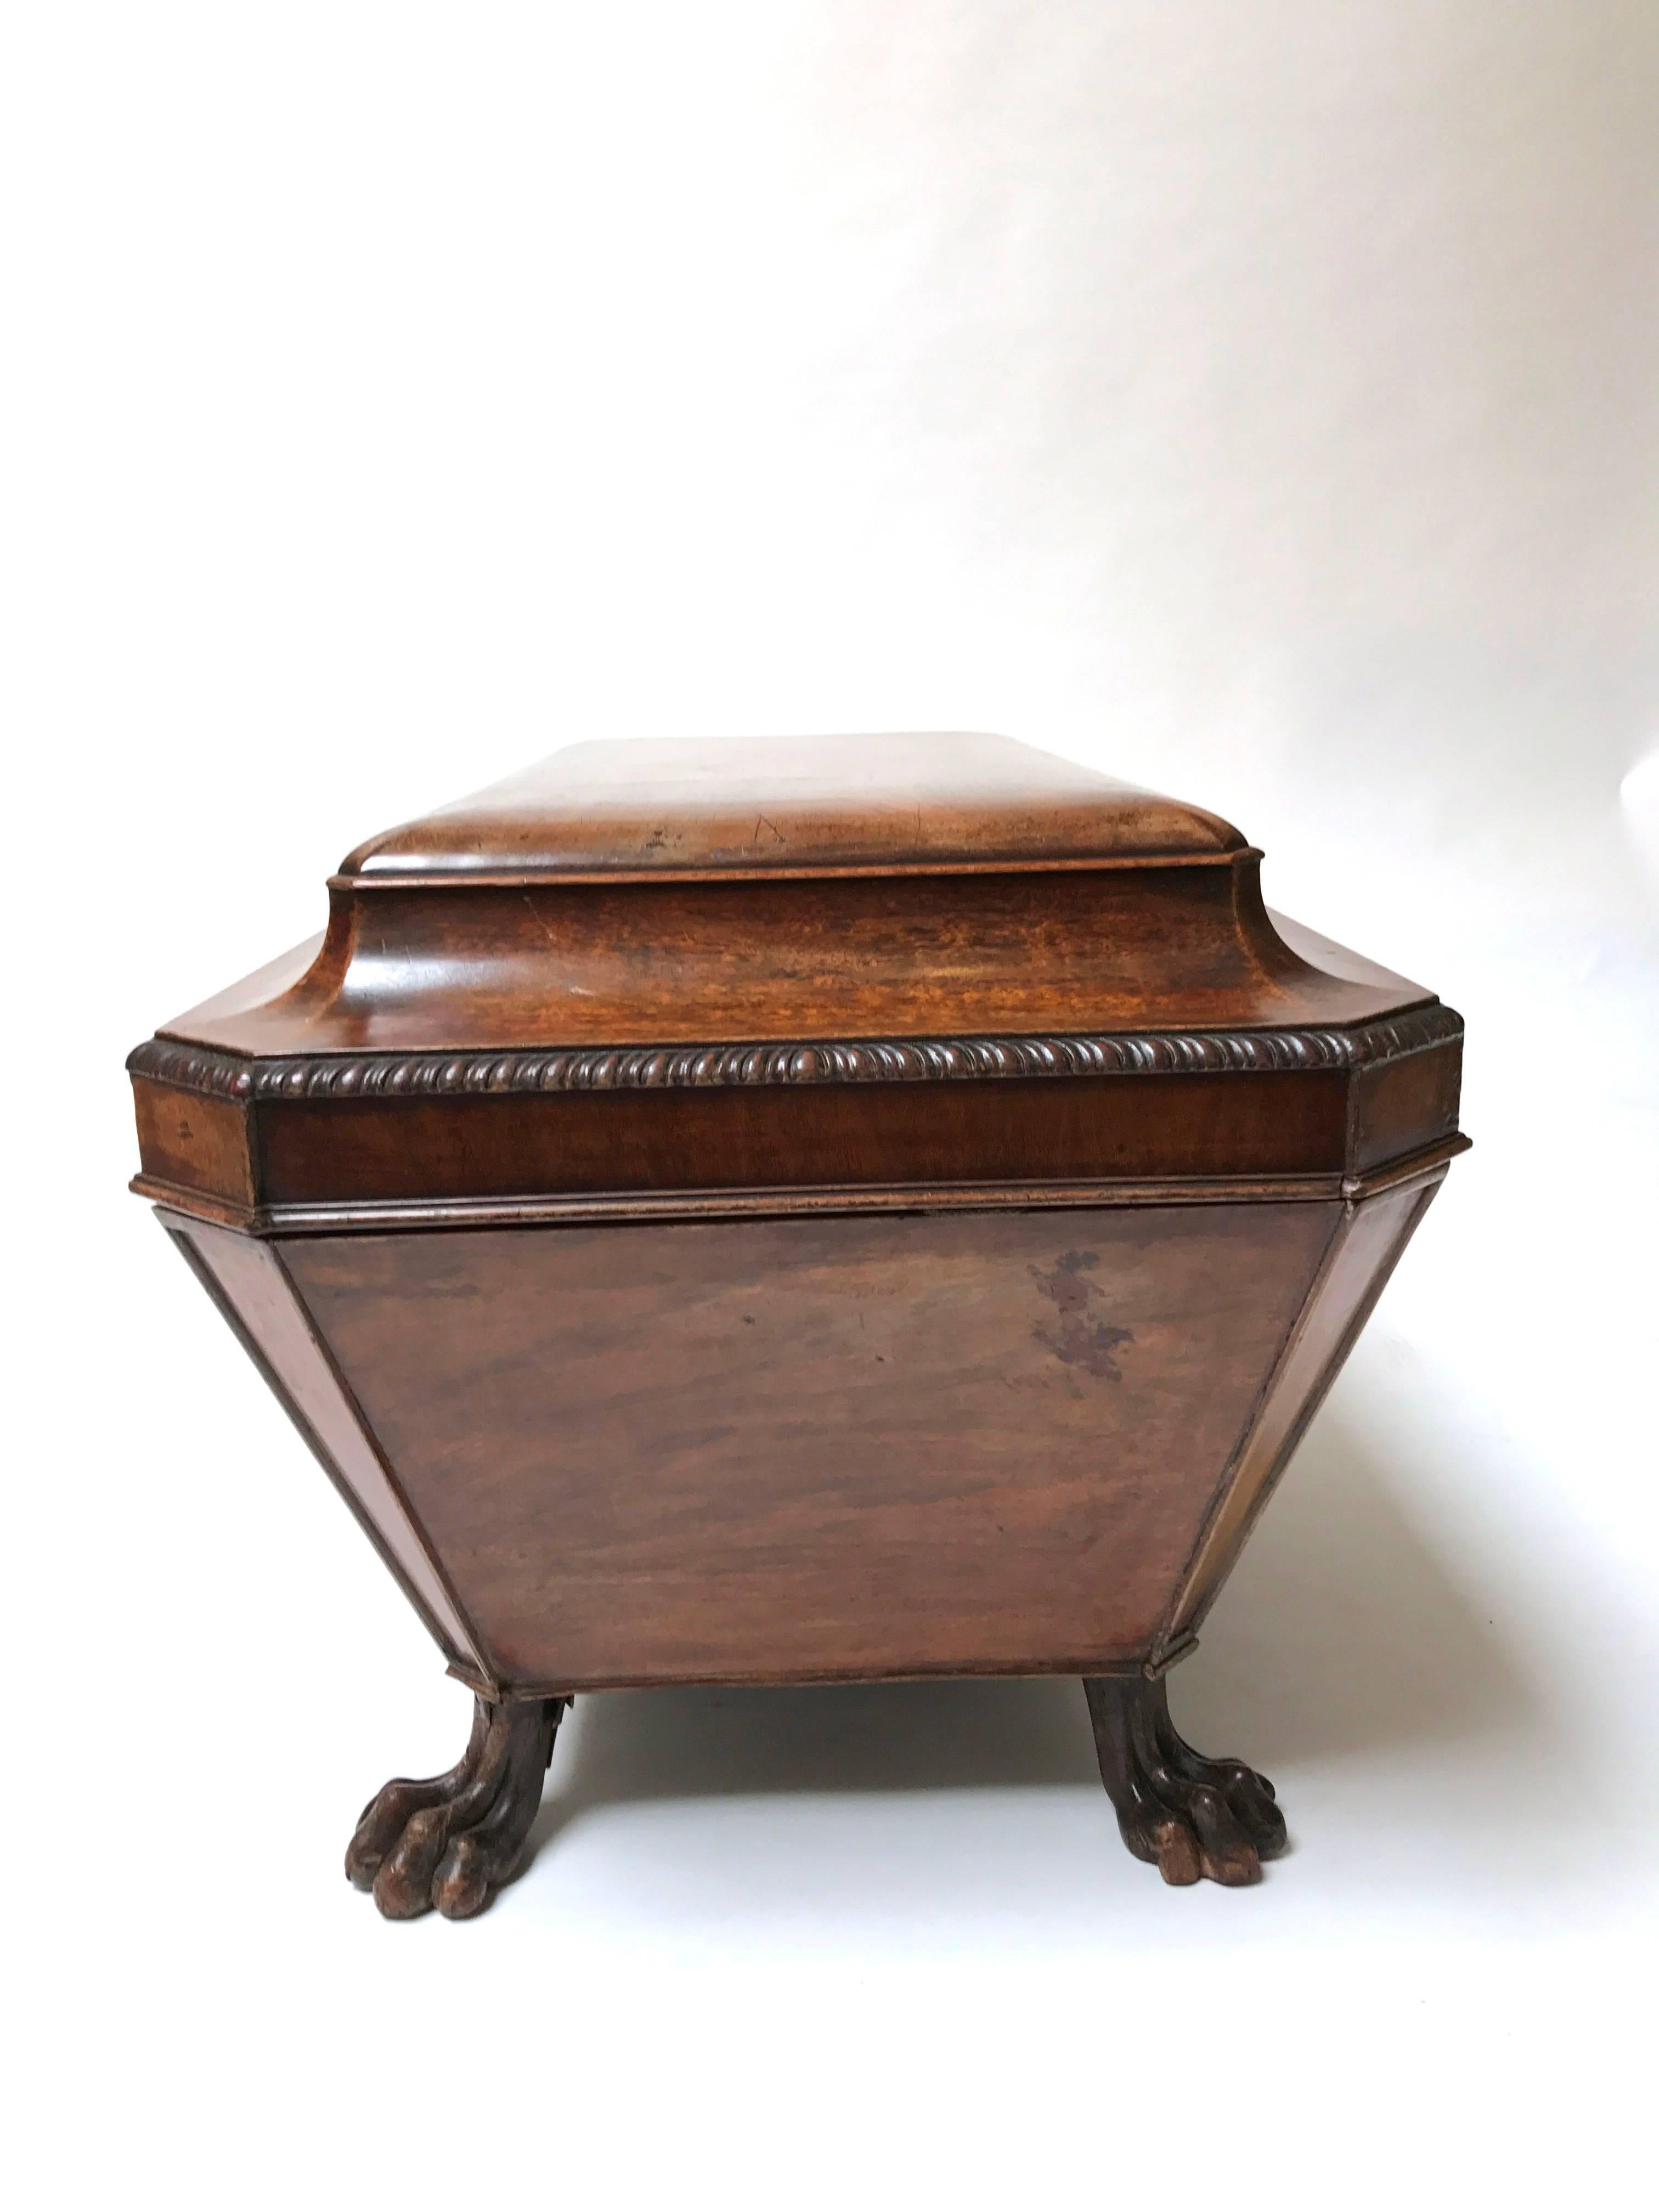 A late 18th century English Georgian mahogany sarcophagus flat-top cellarette of particularly elegant form, with claw feet and a wonderful faded warm mahogany patination, England, circa 1780.

Lovely for an end table or in front of a small sofa.